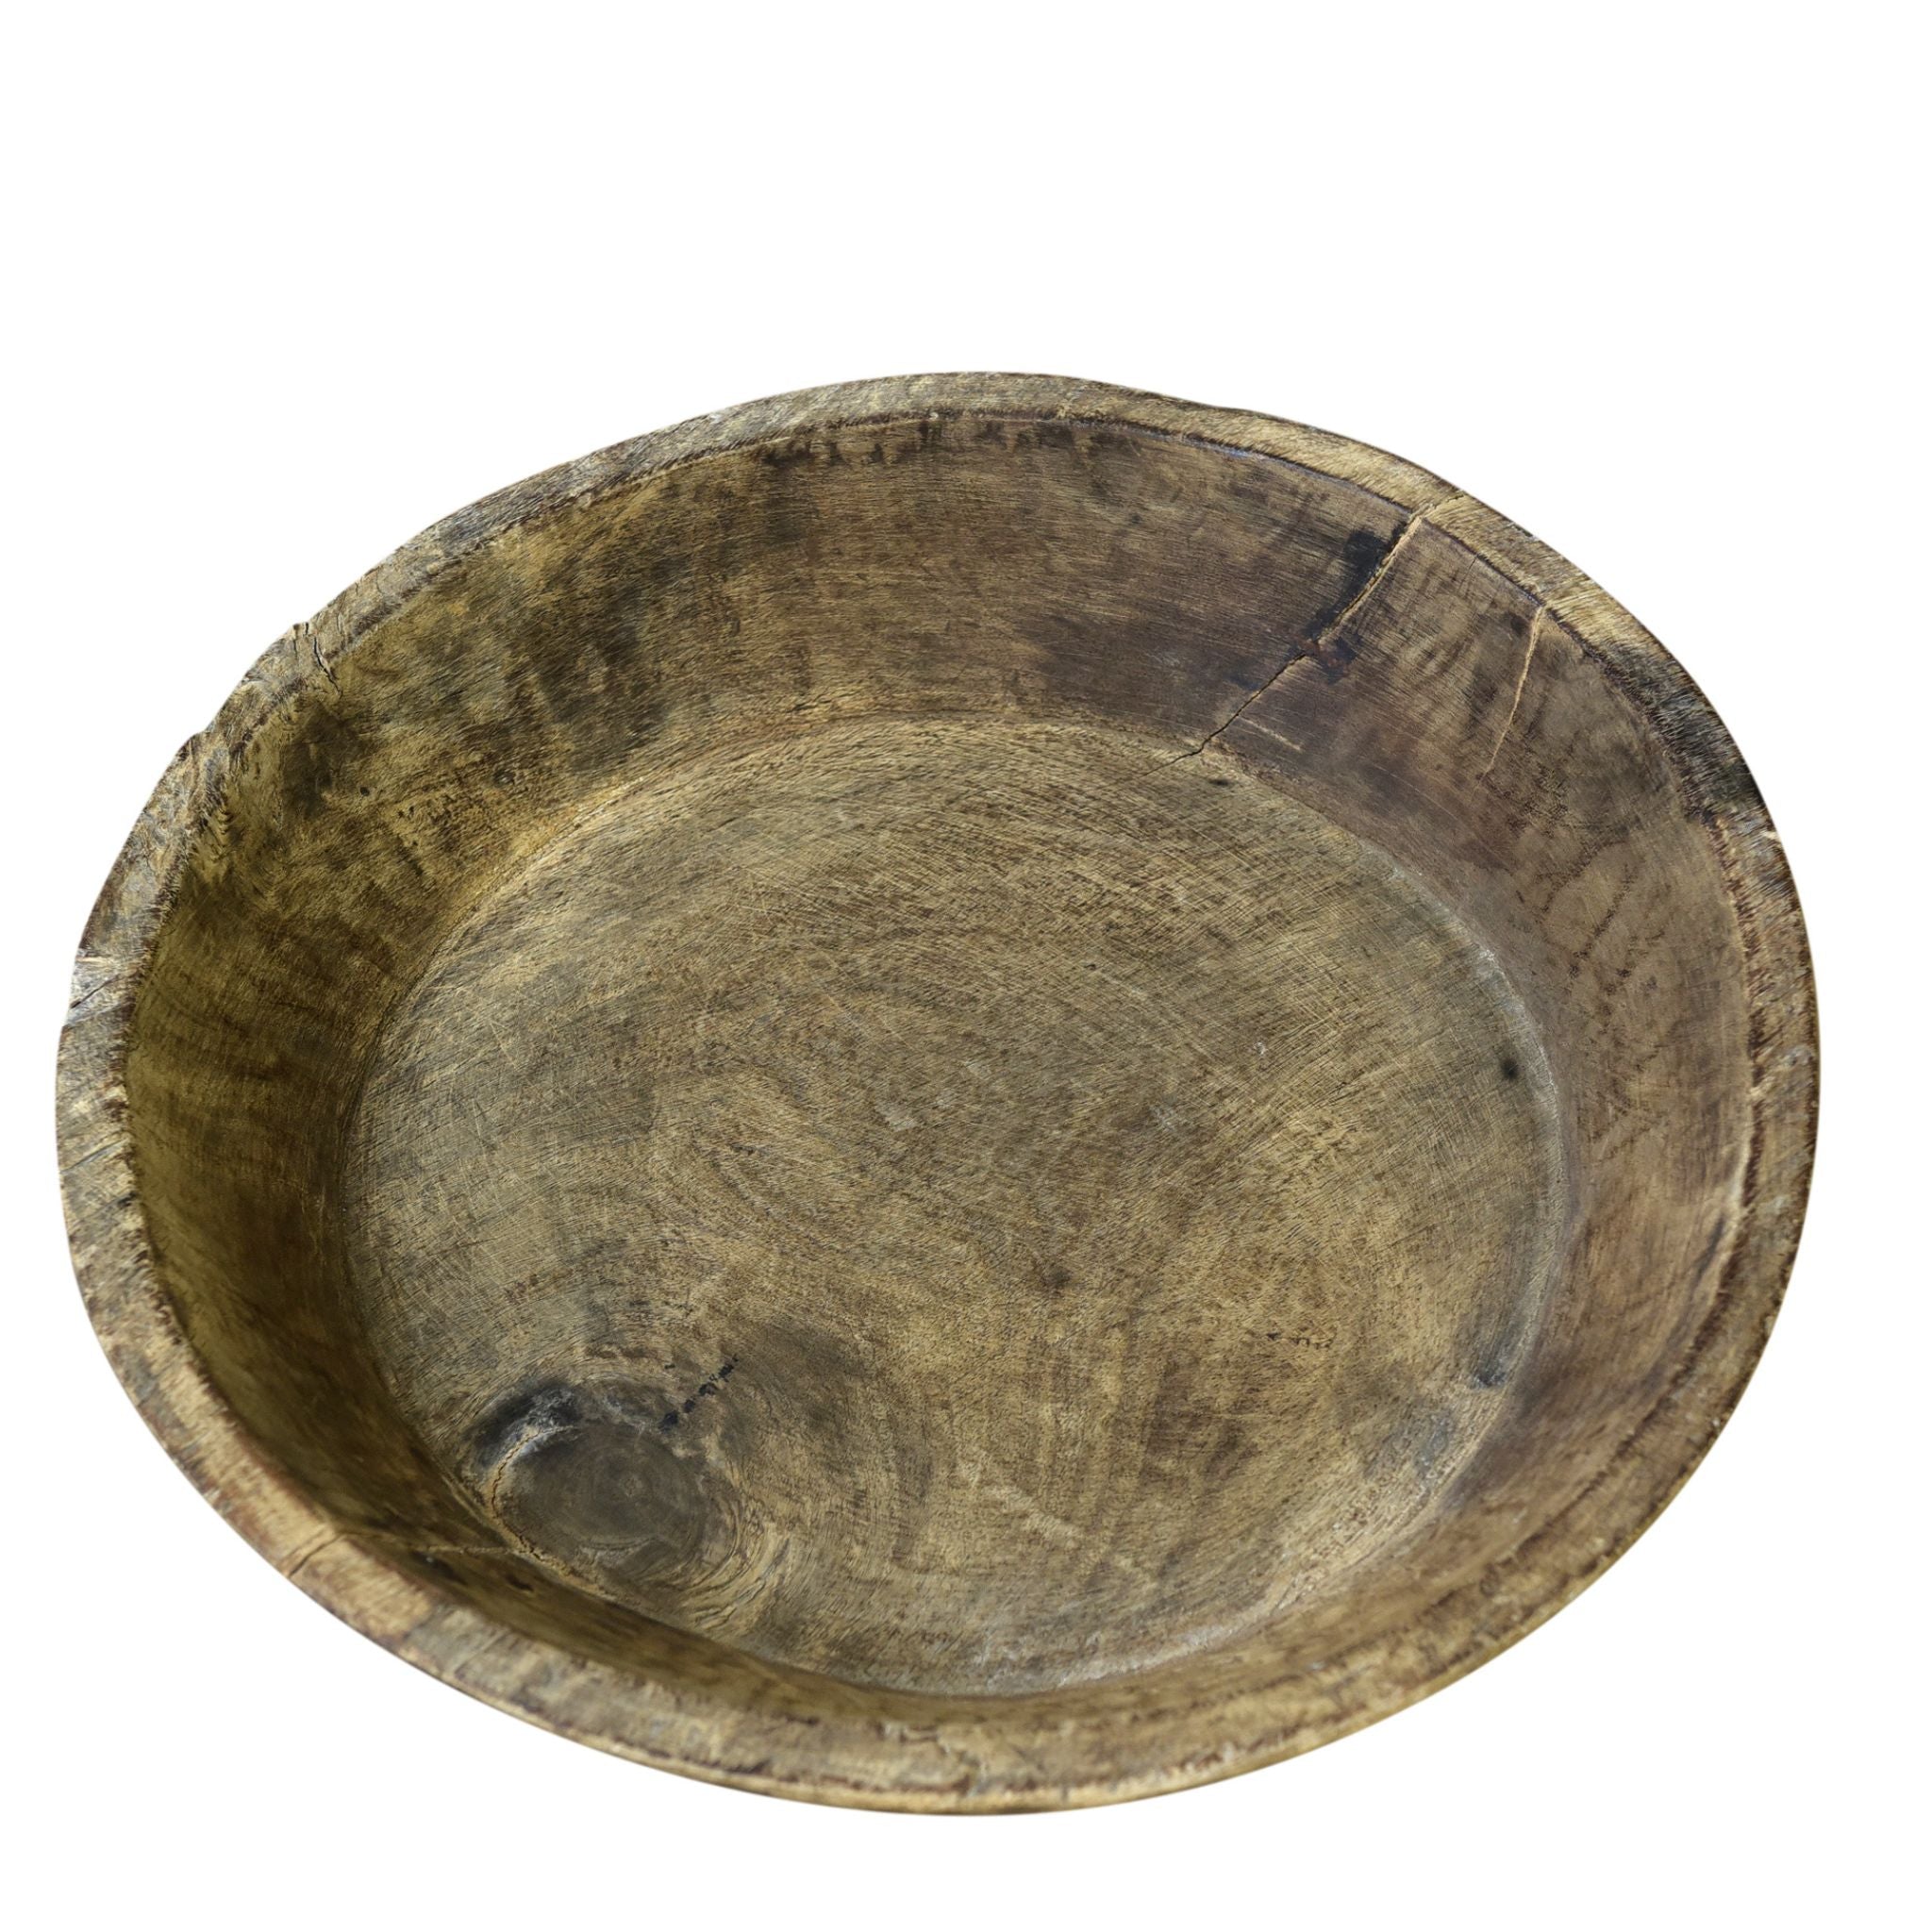 Vintage Wood Bowl view of the inside of the bowl